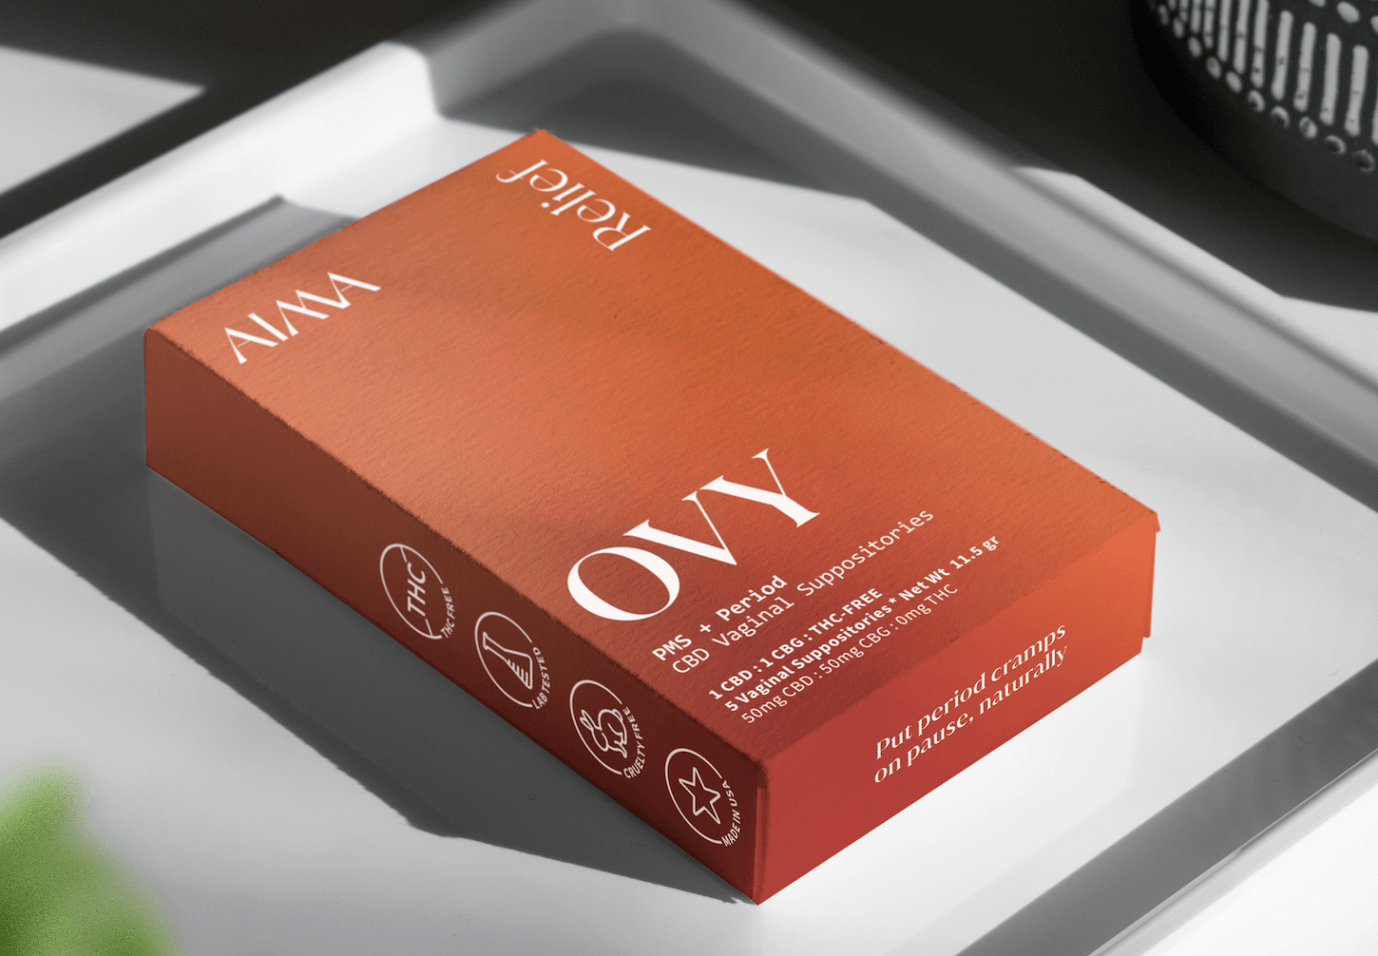 Box of Ovy for Period Pain